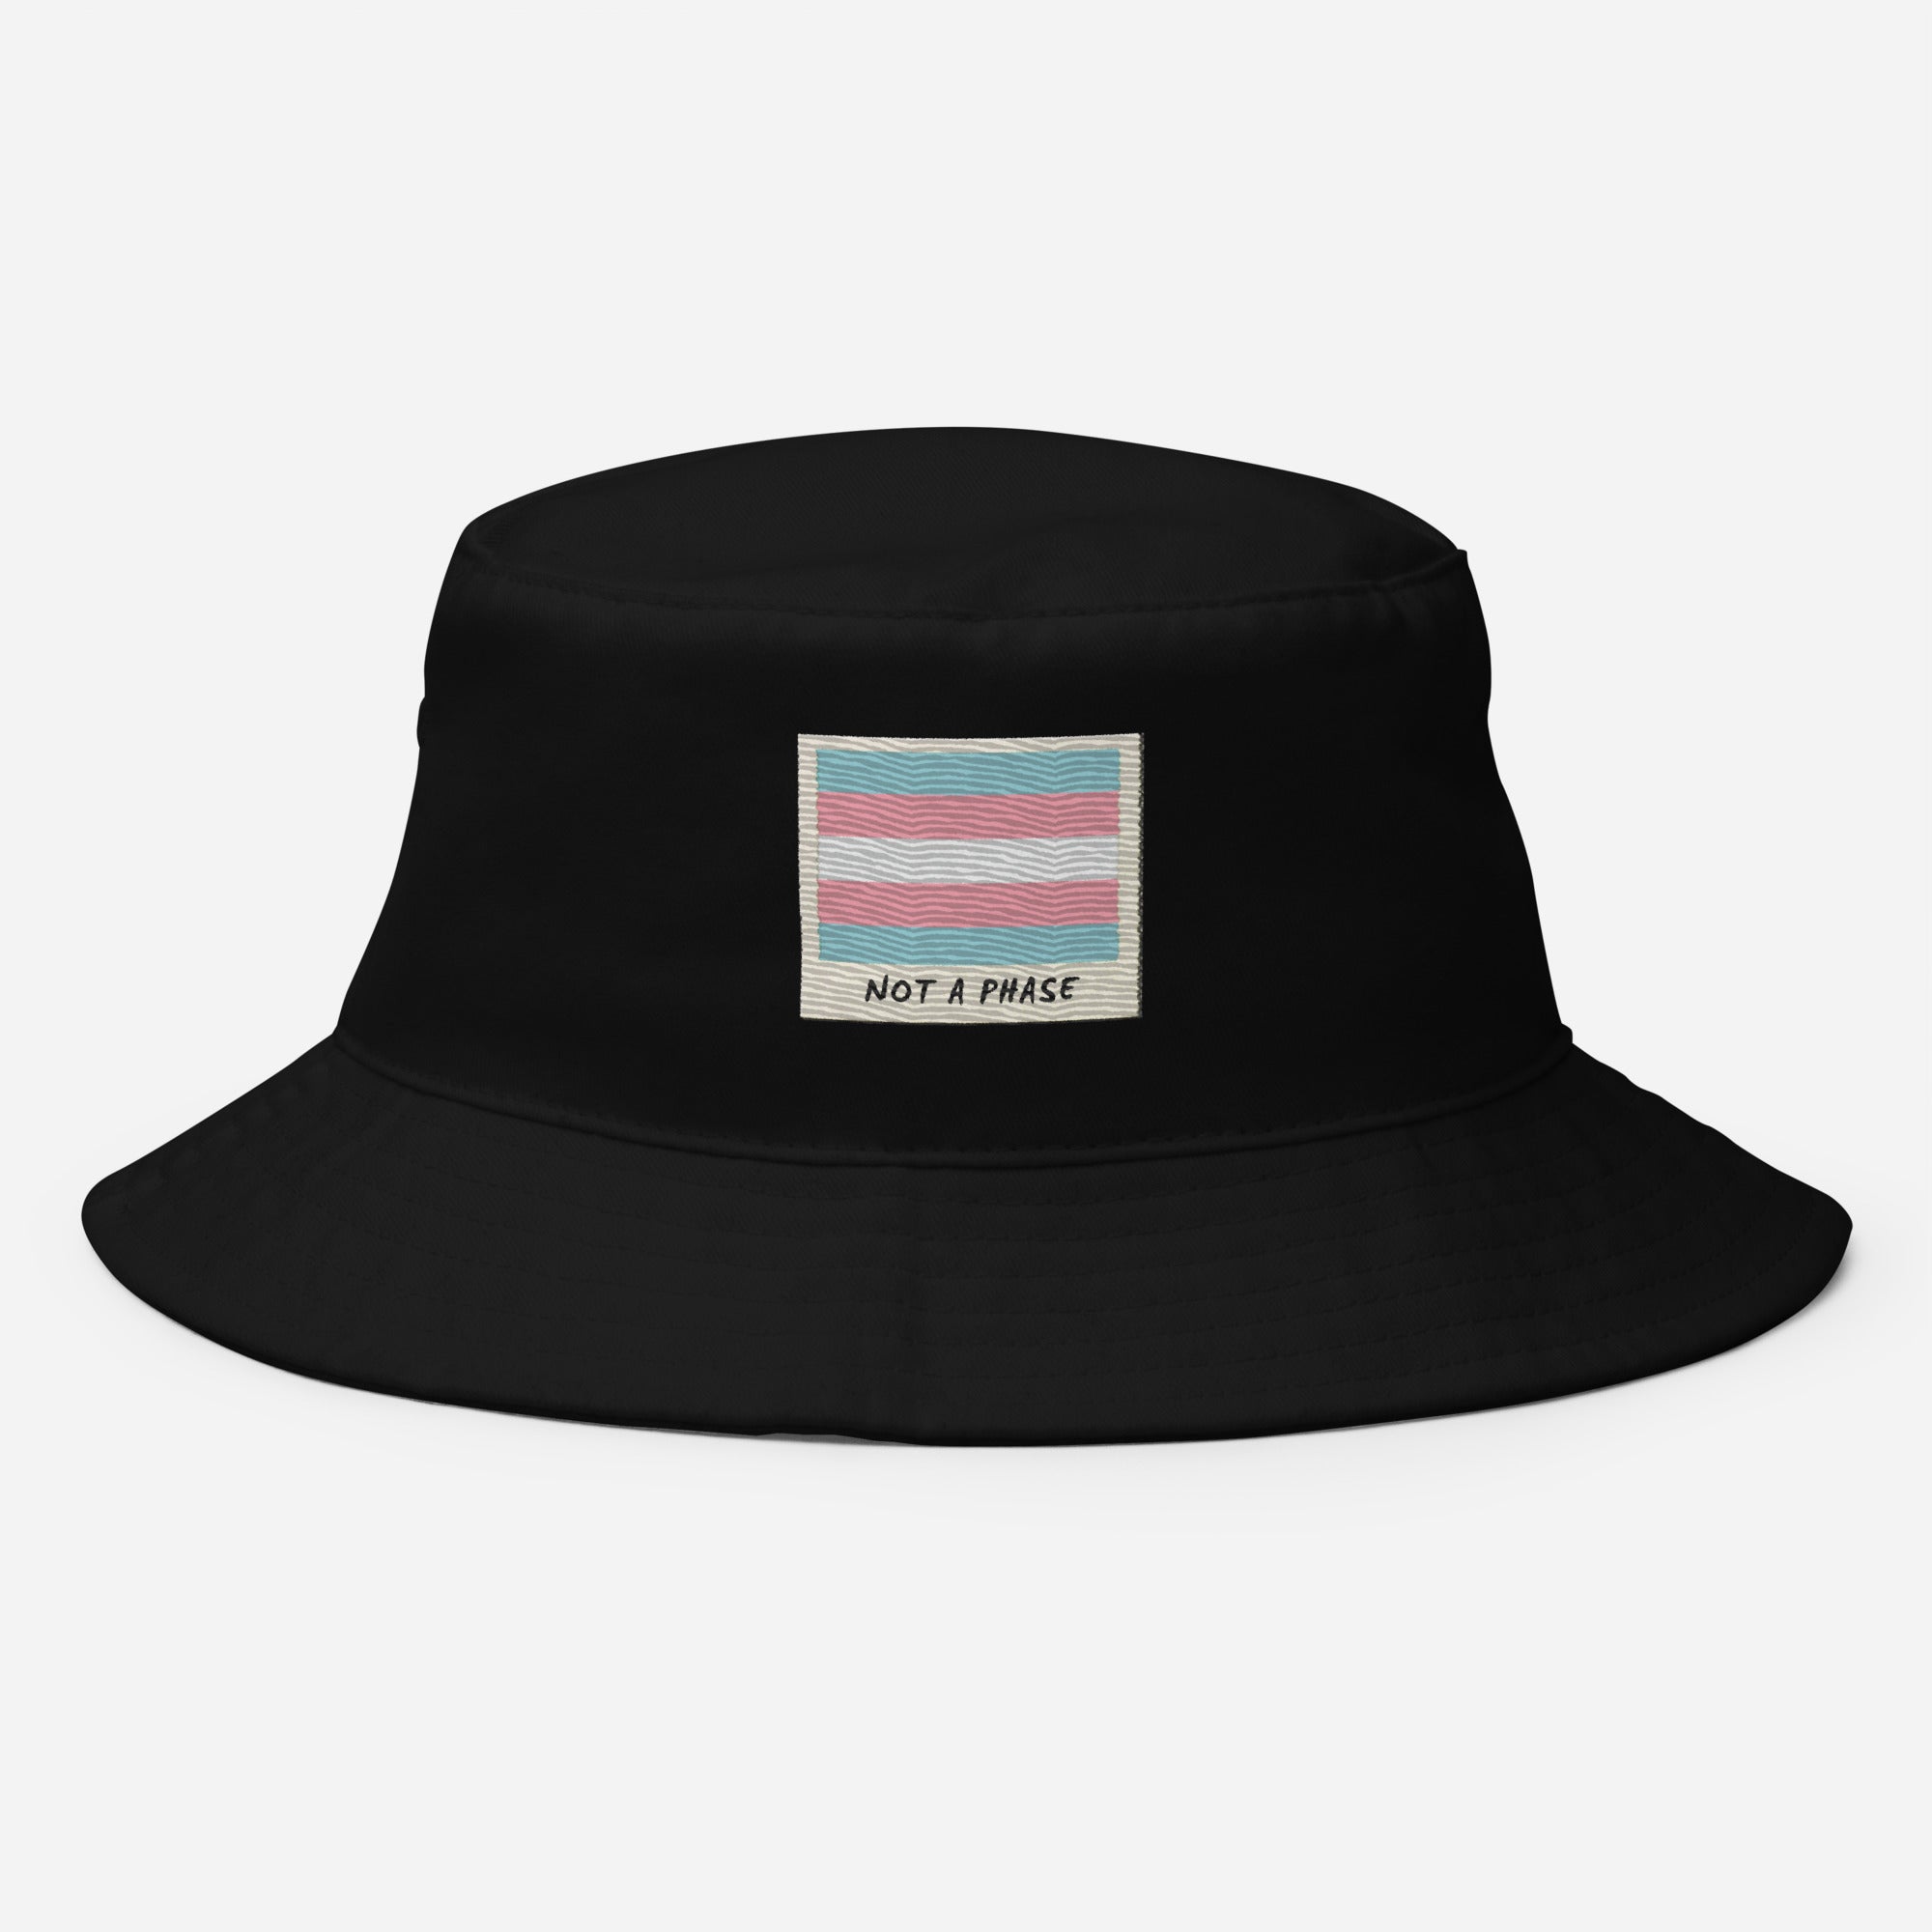 Trans Pride Bucket Hat Not a Phase